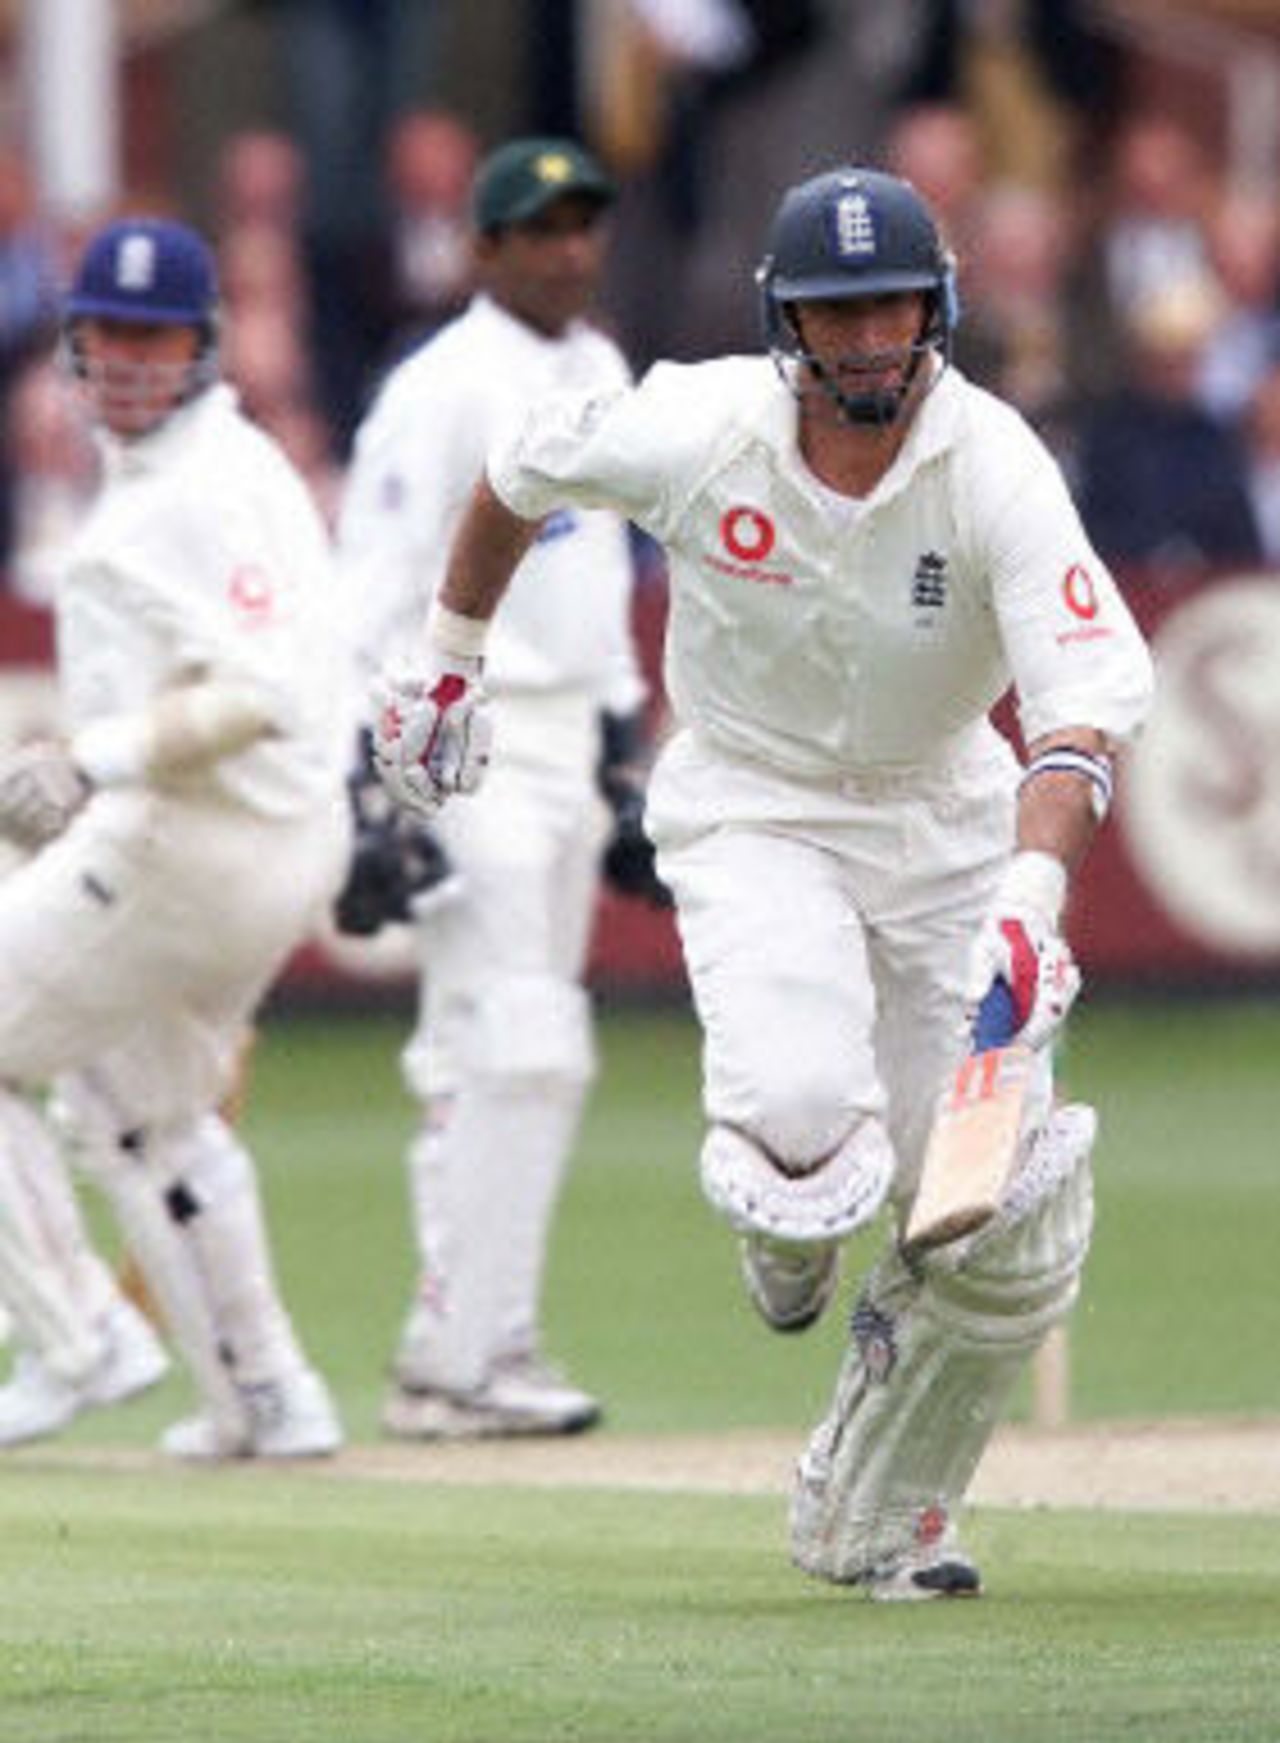 Nasser Hussain running between the wickets, day 3, 1st Test at Lord's, 17-21 May 2001